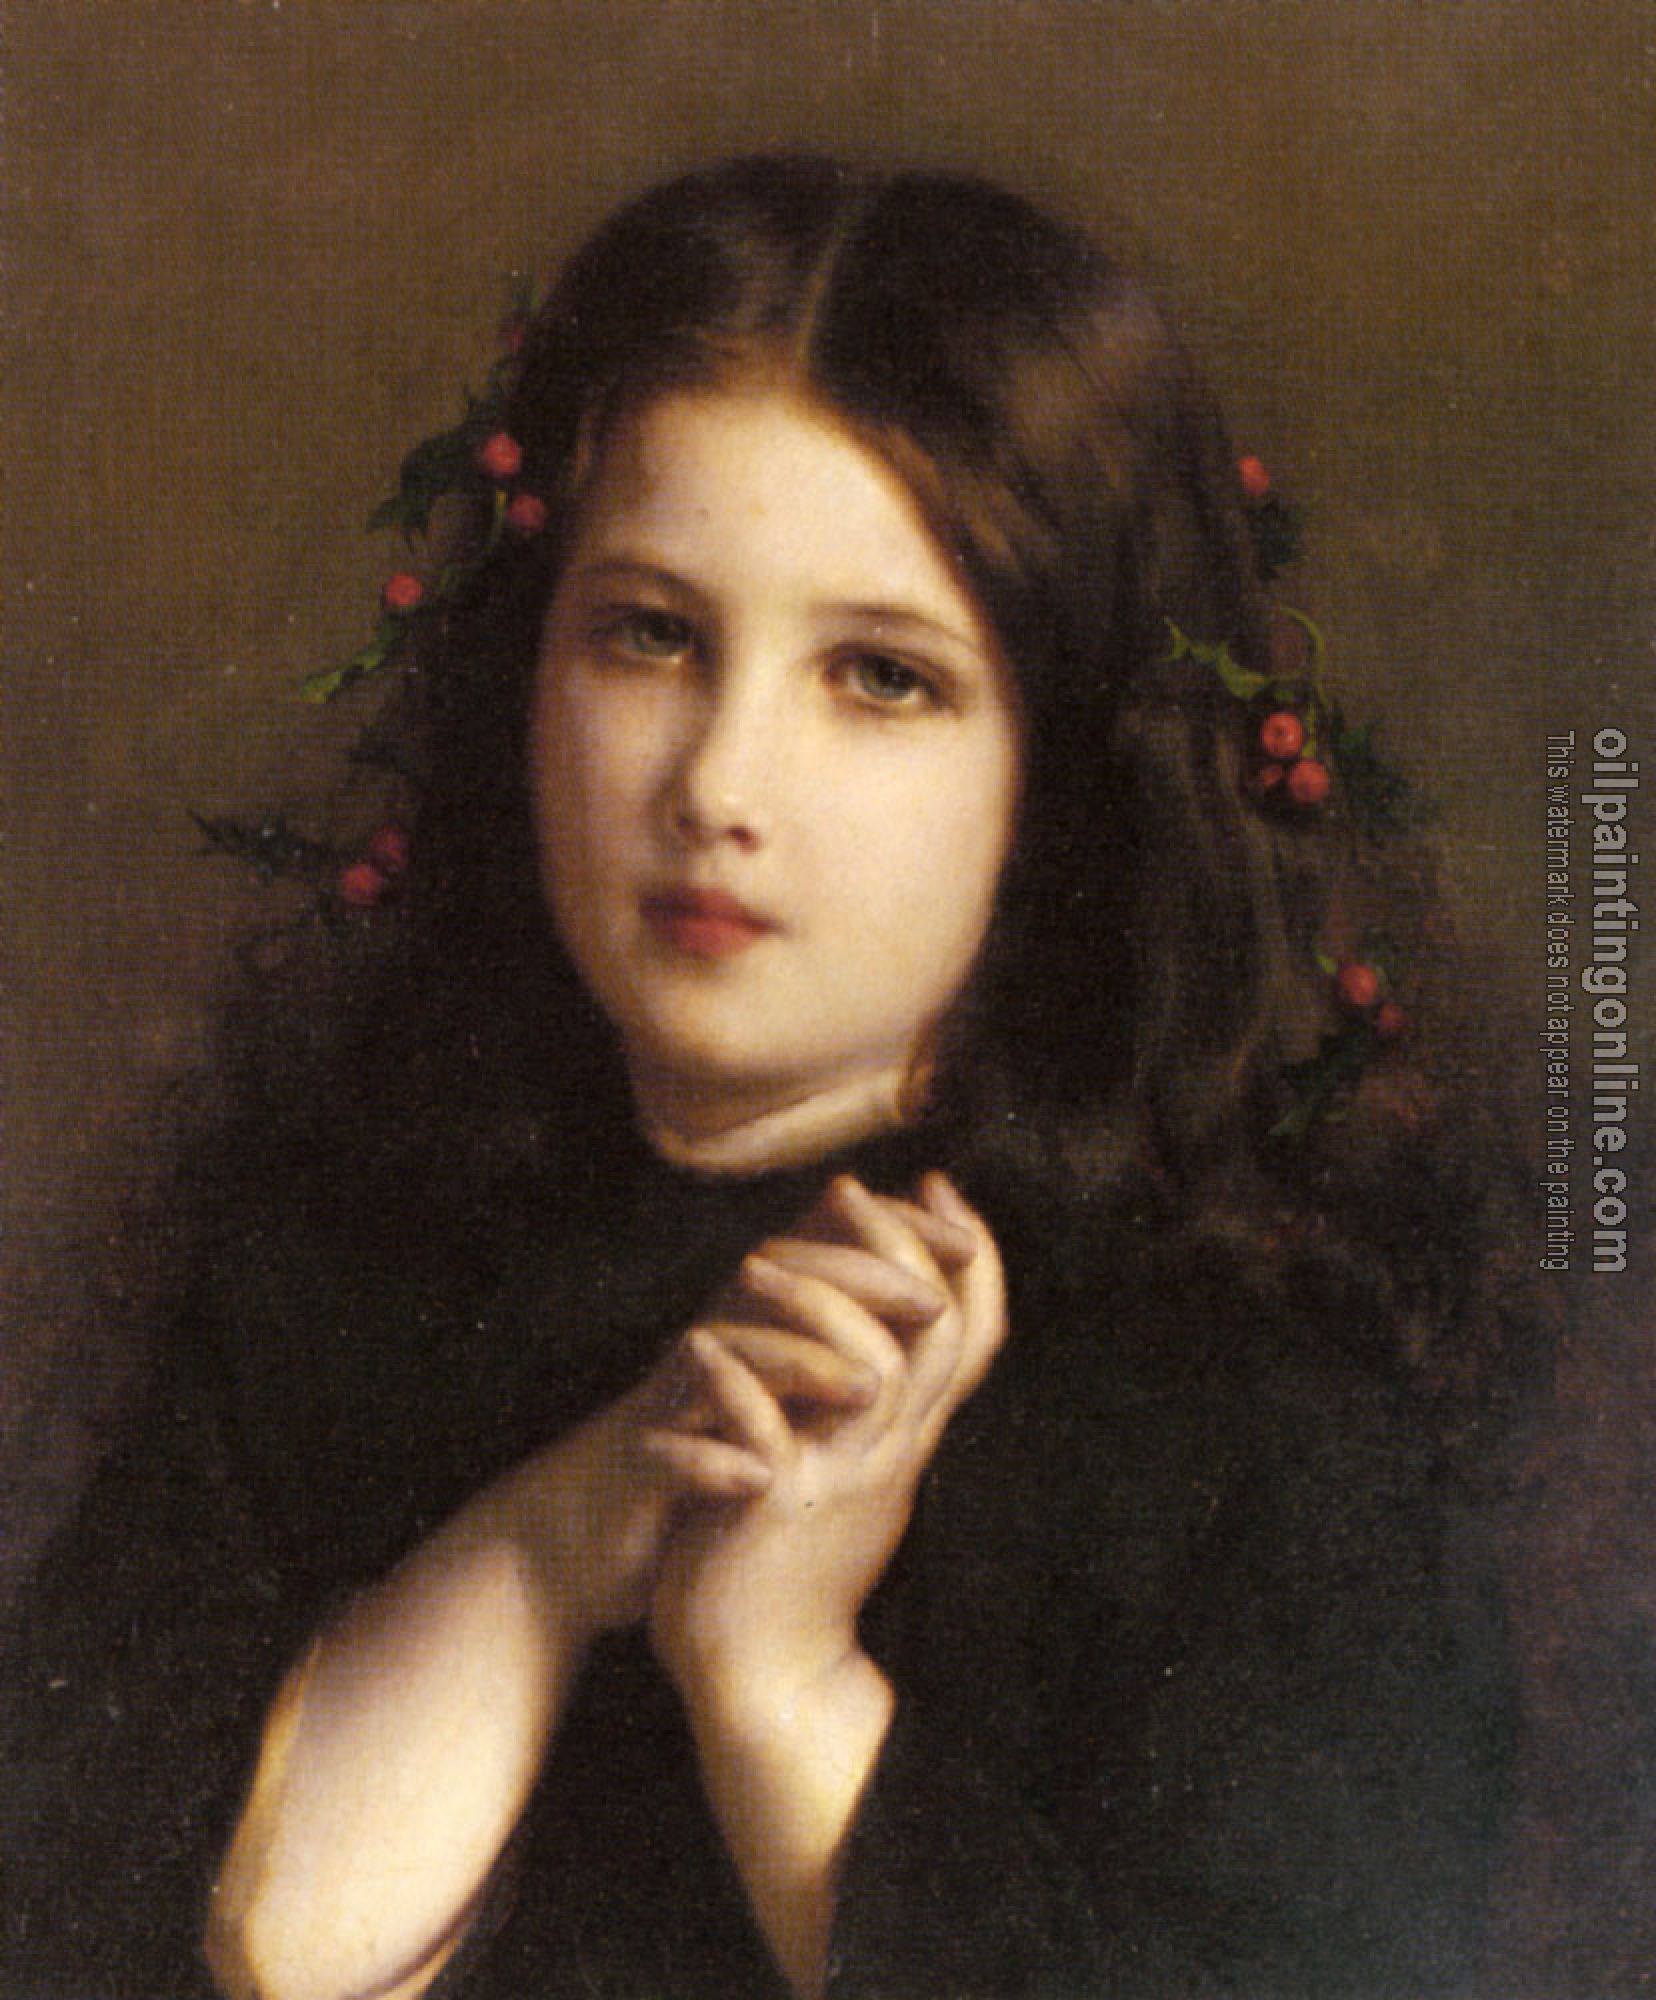 Piot, Etienne Adolphe - A Young Girl with Holly Berries in her Hair